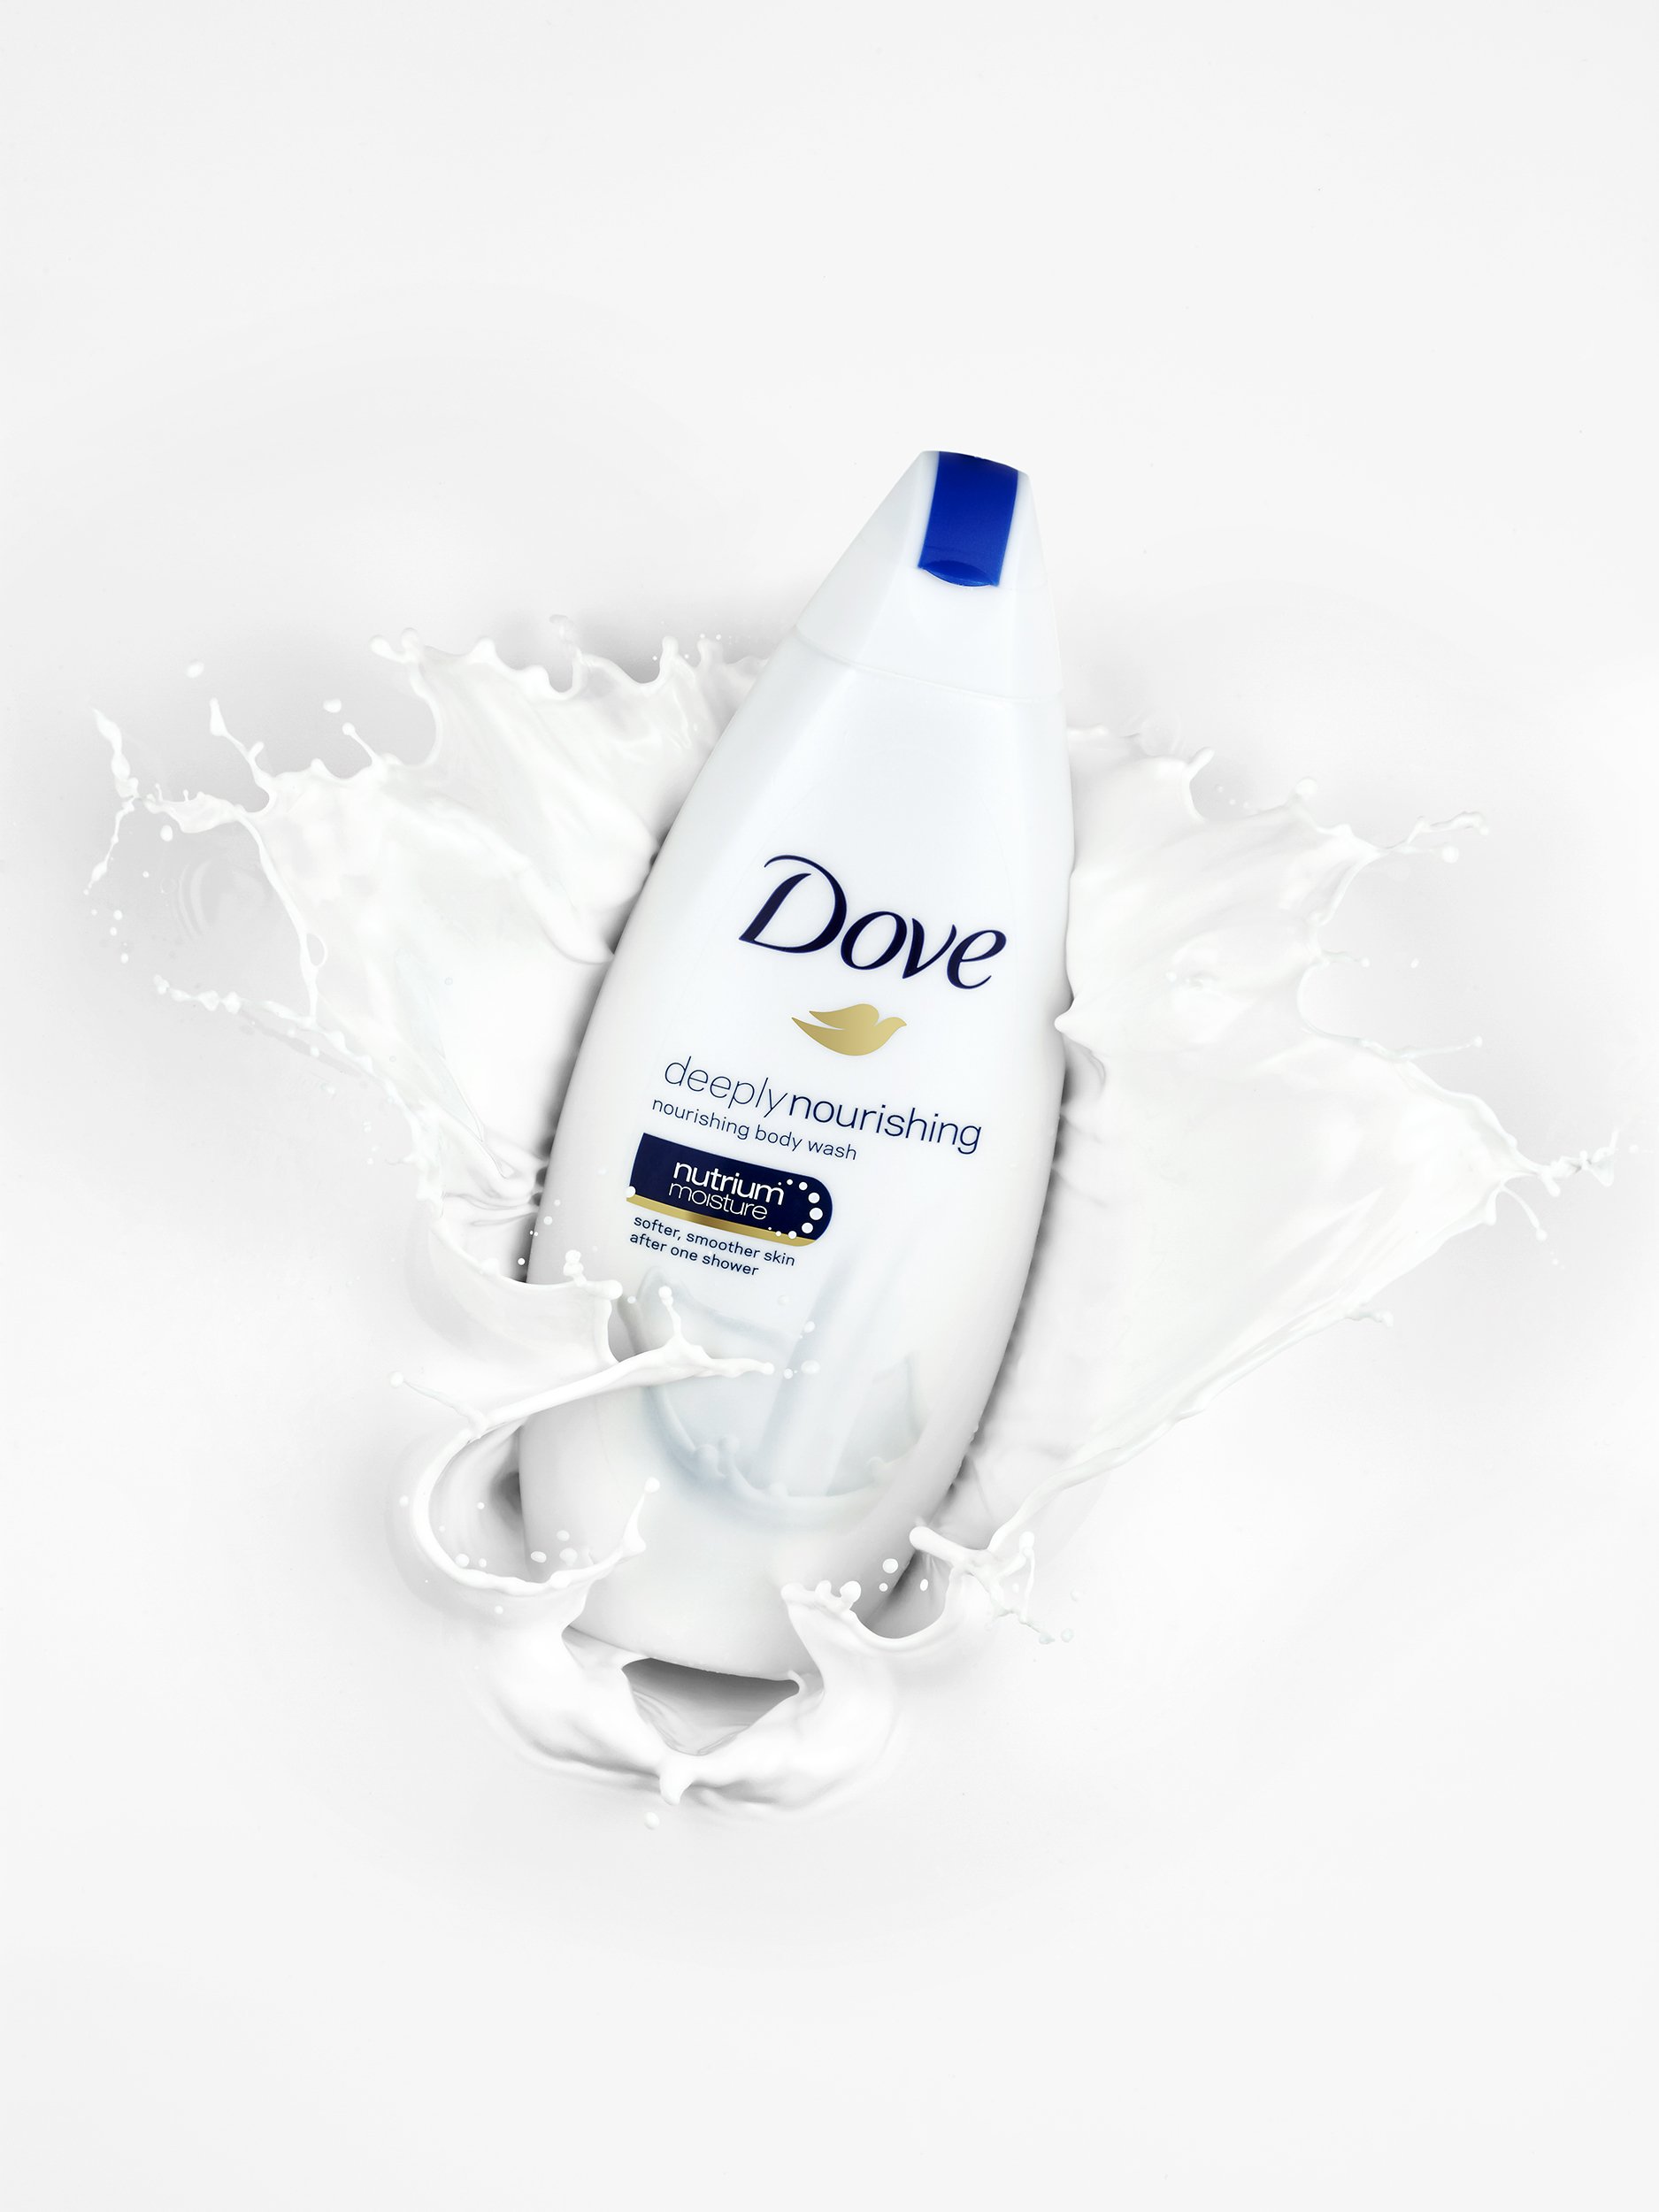 Dove Deeply Nourishing Body Wash - product photography by London-based Simon Lyle Ritchie